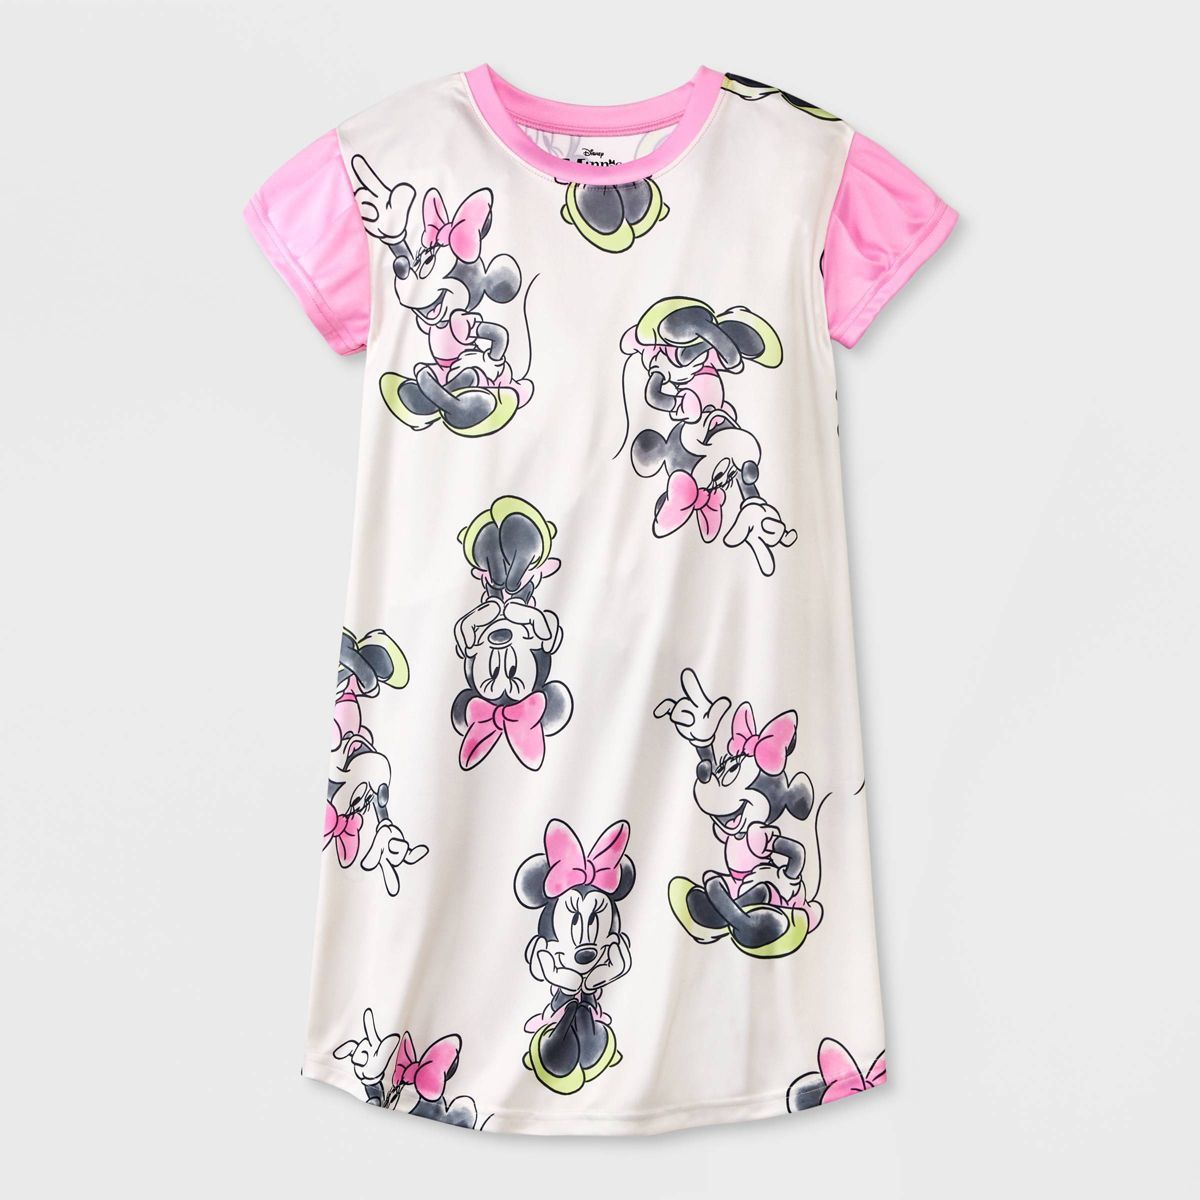 Girls' Disney Minnie Mouse NightGown - Pink/Off-White | Target